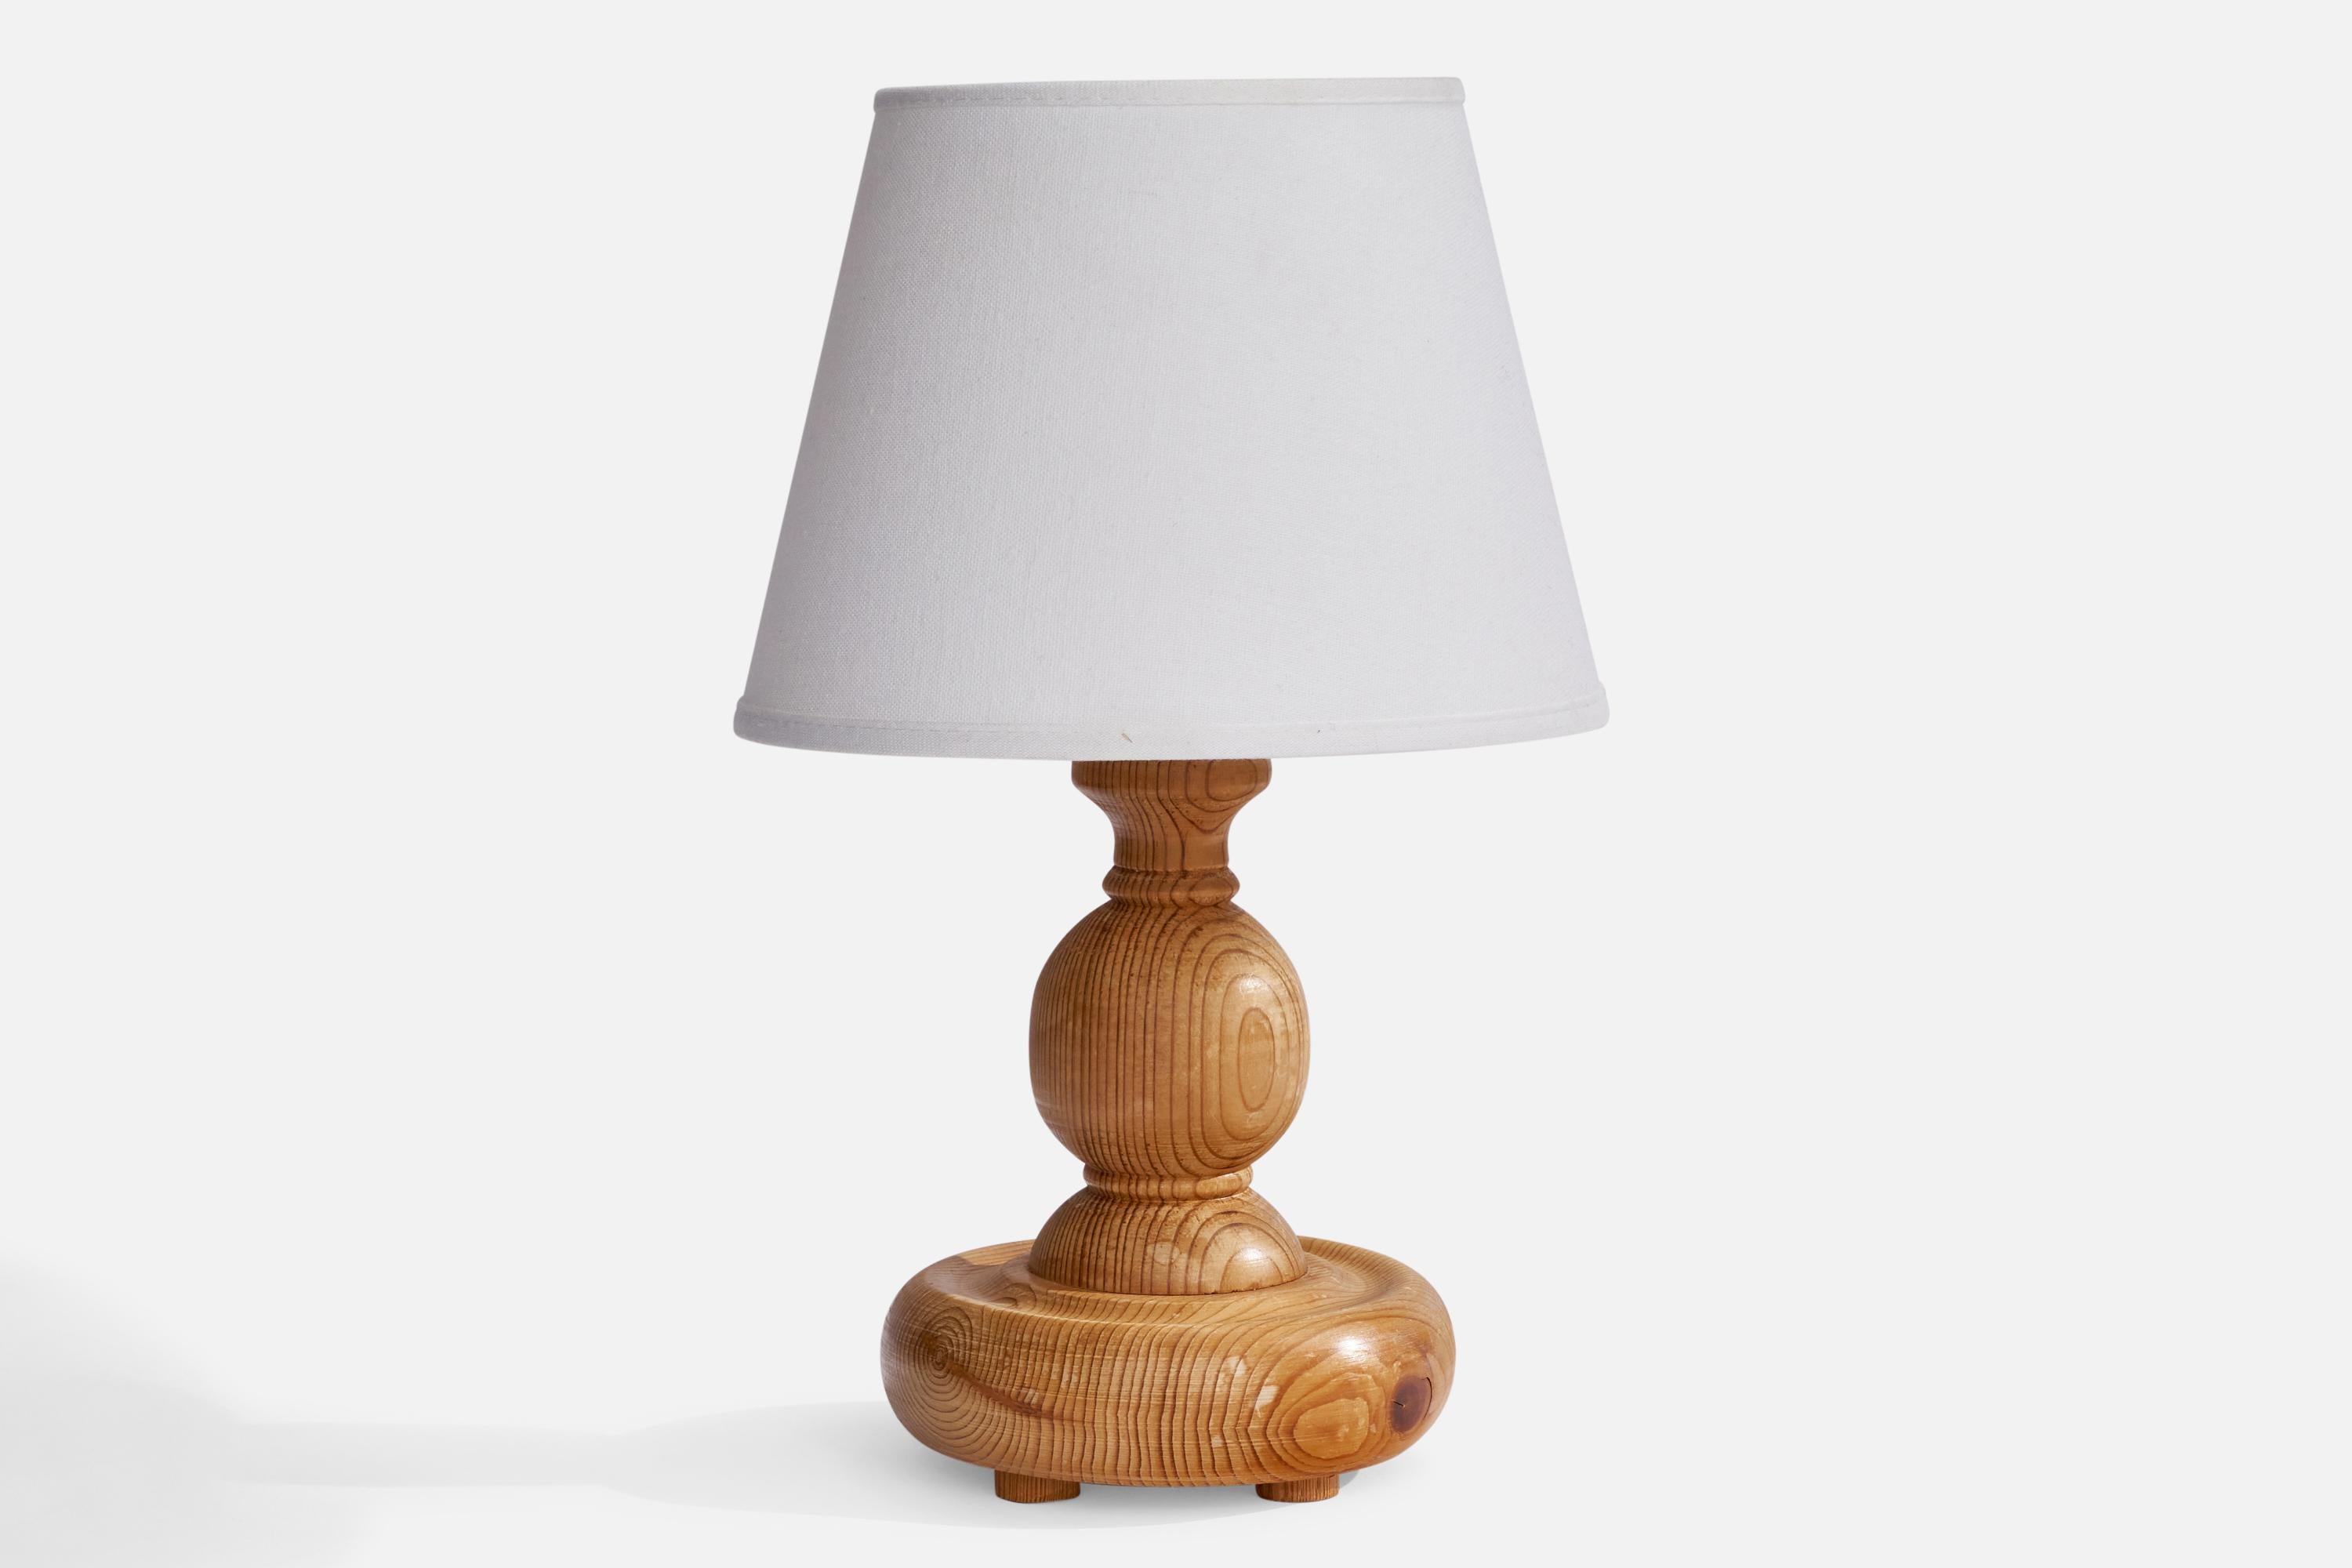 A pine table lamp designed and produced in Sweden, 1970s.

Dimensions of Lamp (inches): 9.75” H x 5.25” Diameter
Dimensions of Shade (inches): 5.25” Top Diameter x 8” Bottom Diameter x 5.75” H
Dimensions of Lamp with Shade (inches): 12.75” H x 8”